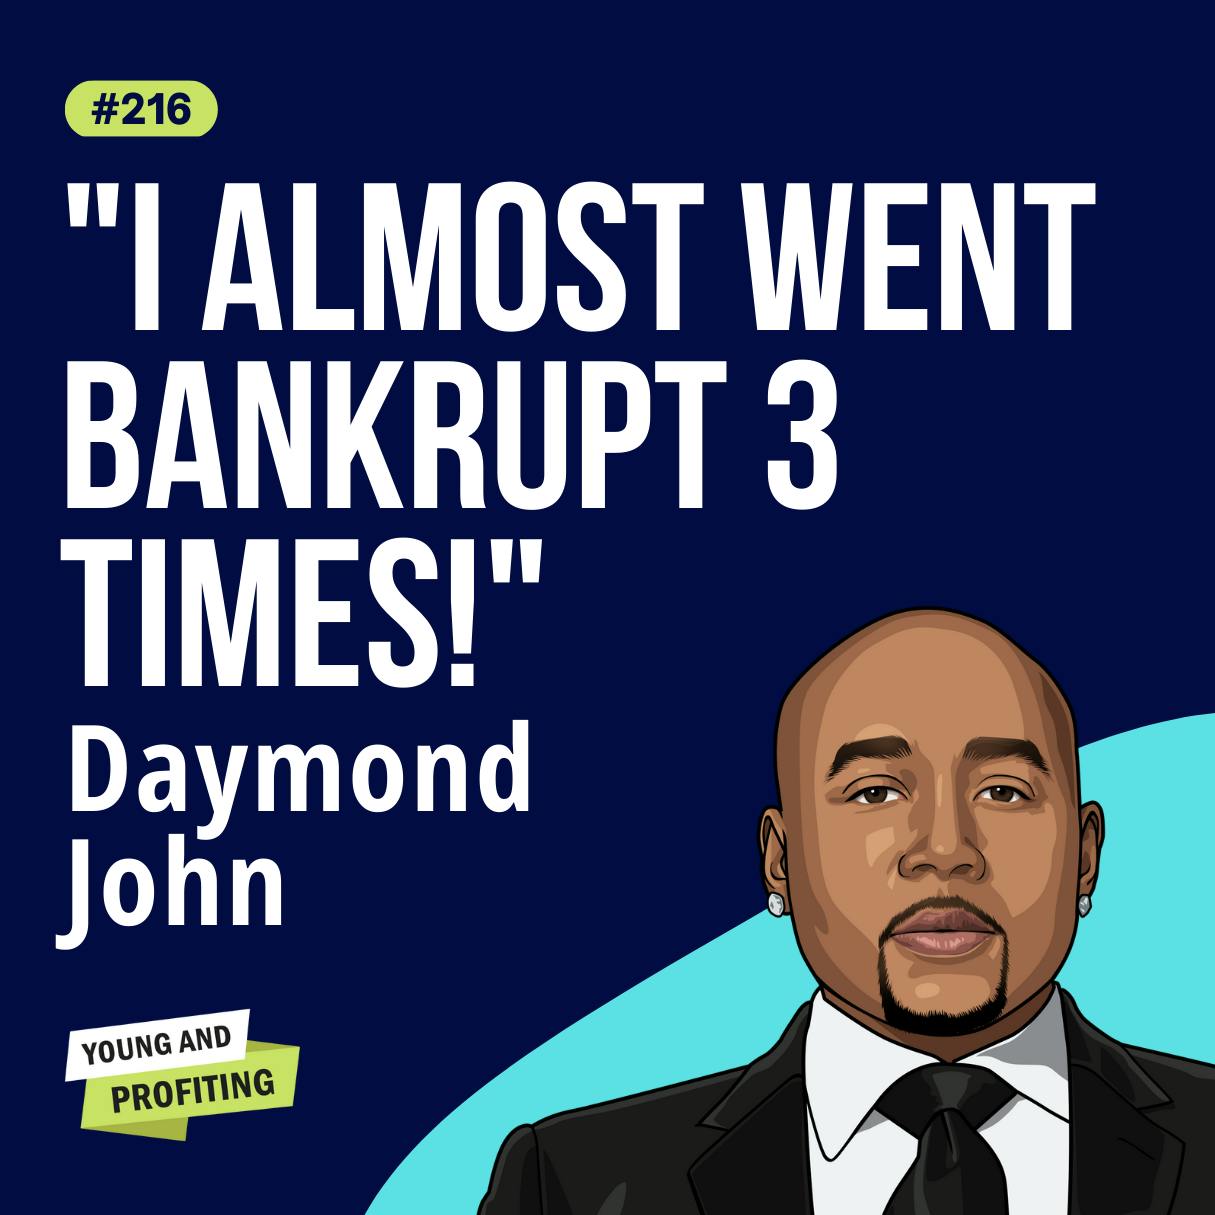 Daymond John: Learn to Earn, How The People's Shark is Raising a New Generation of Financially-Savvy People | E216